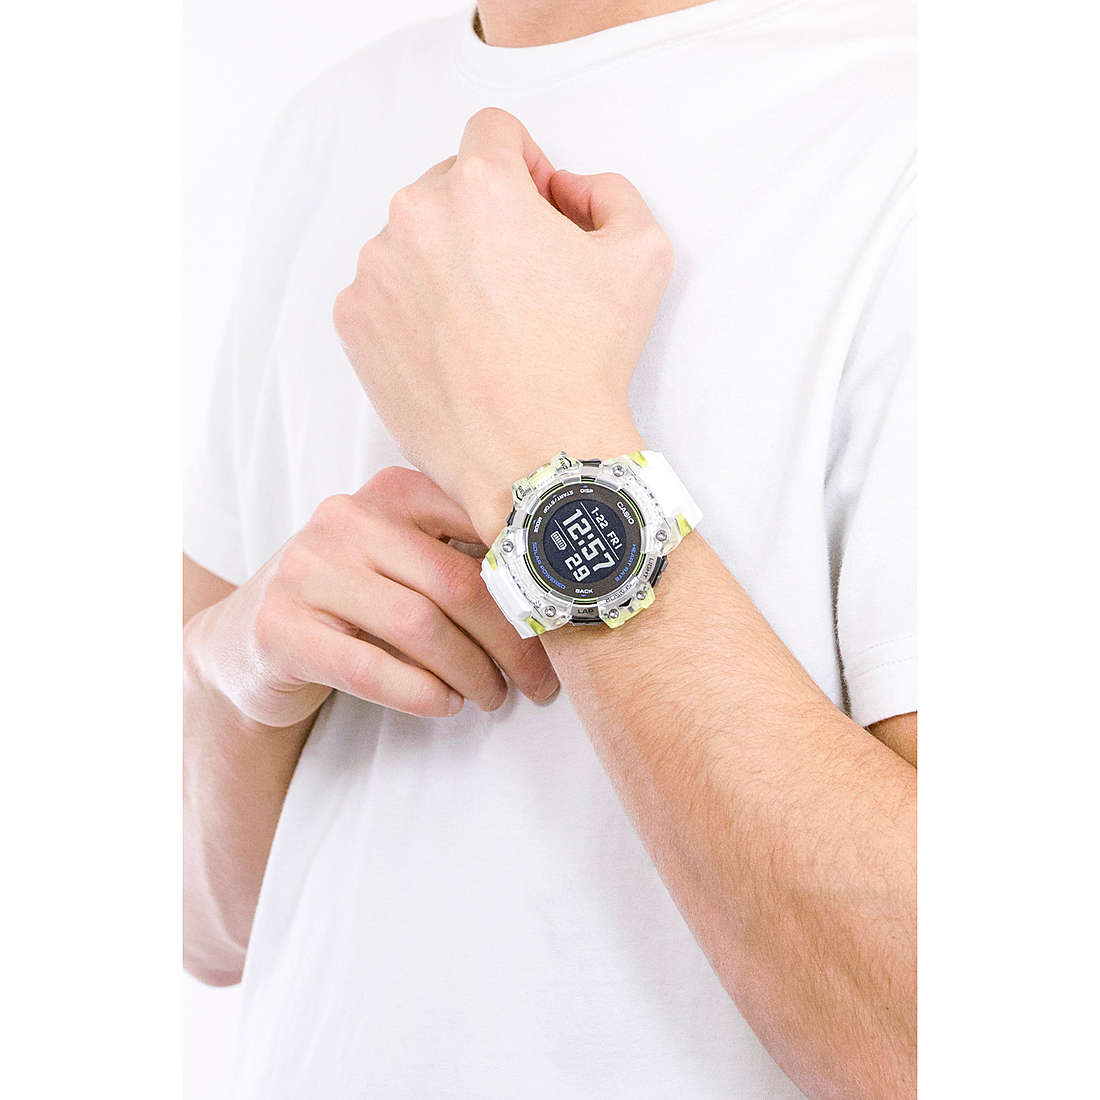 G-Shock Smartwatches G-Squad man GBD-H1000-7A9ER wearing